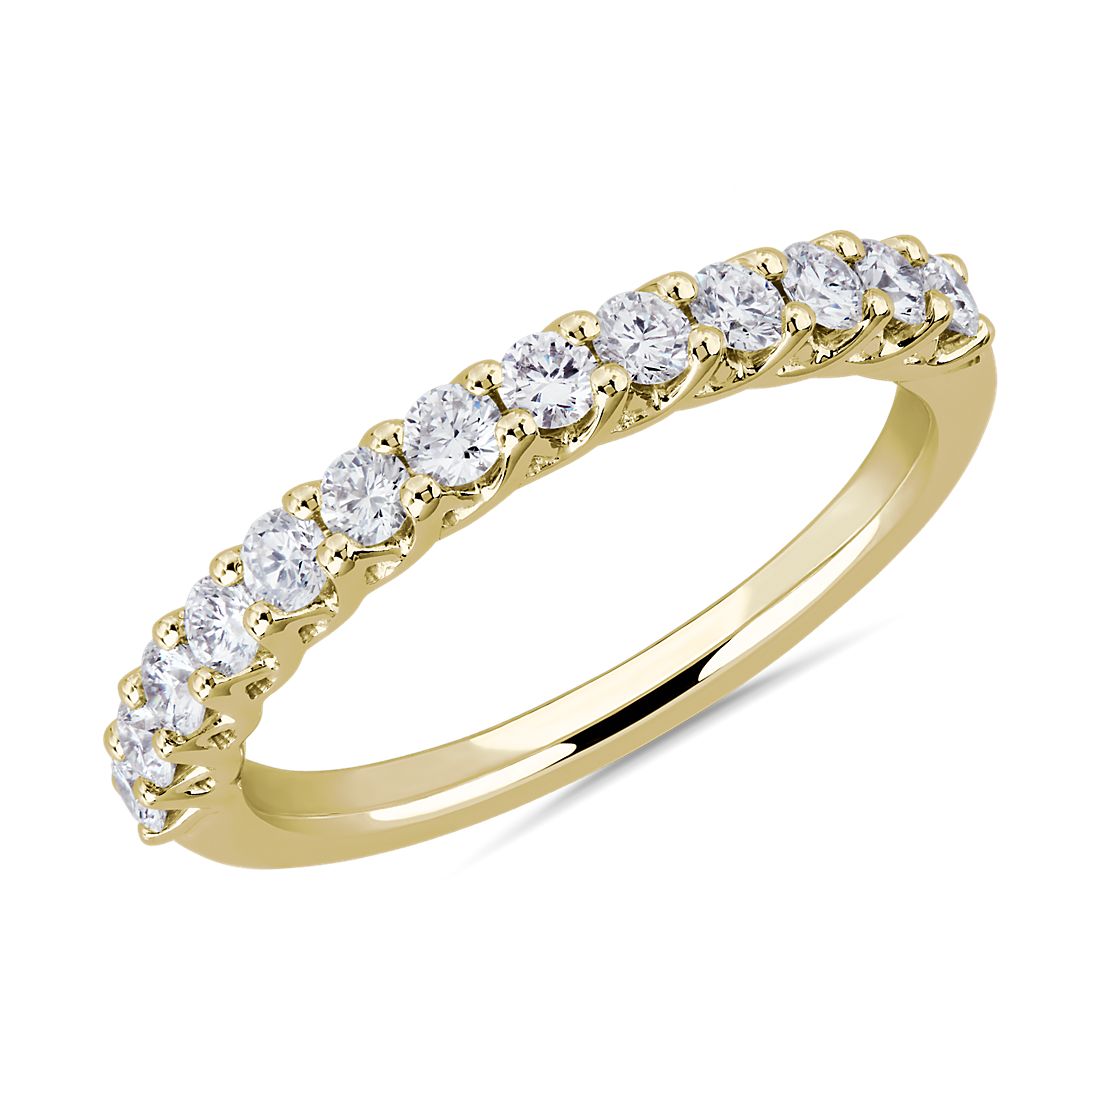 Tessere Weave Diamond Anniversary Band in 14k Yellow Gold (0.49 ct. tw.)